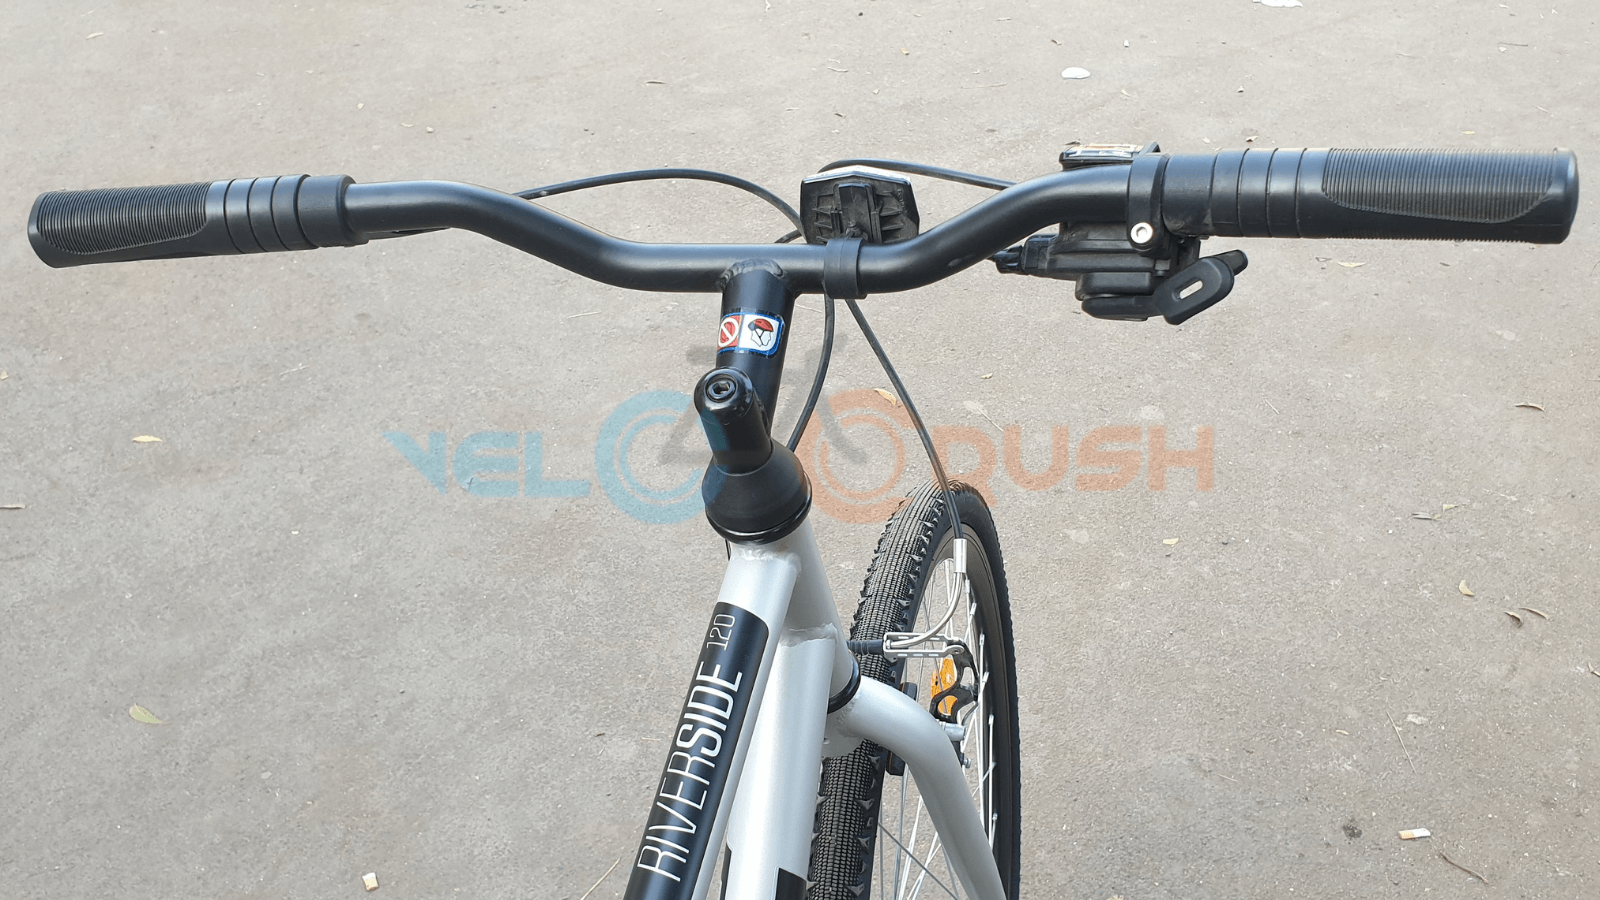 btwin riverside 120 hybrid cycle review